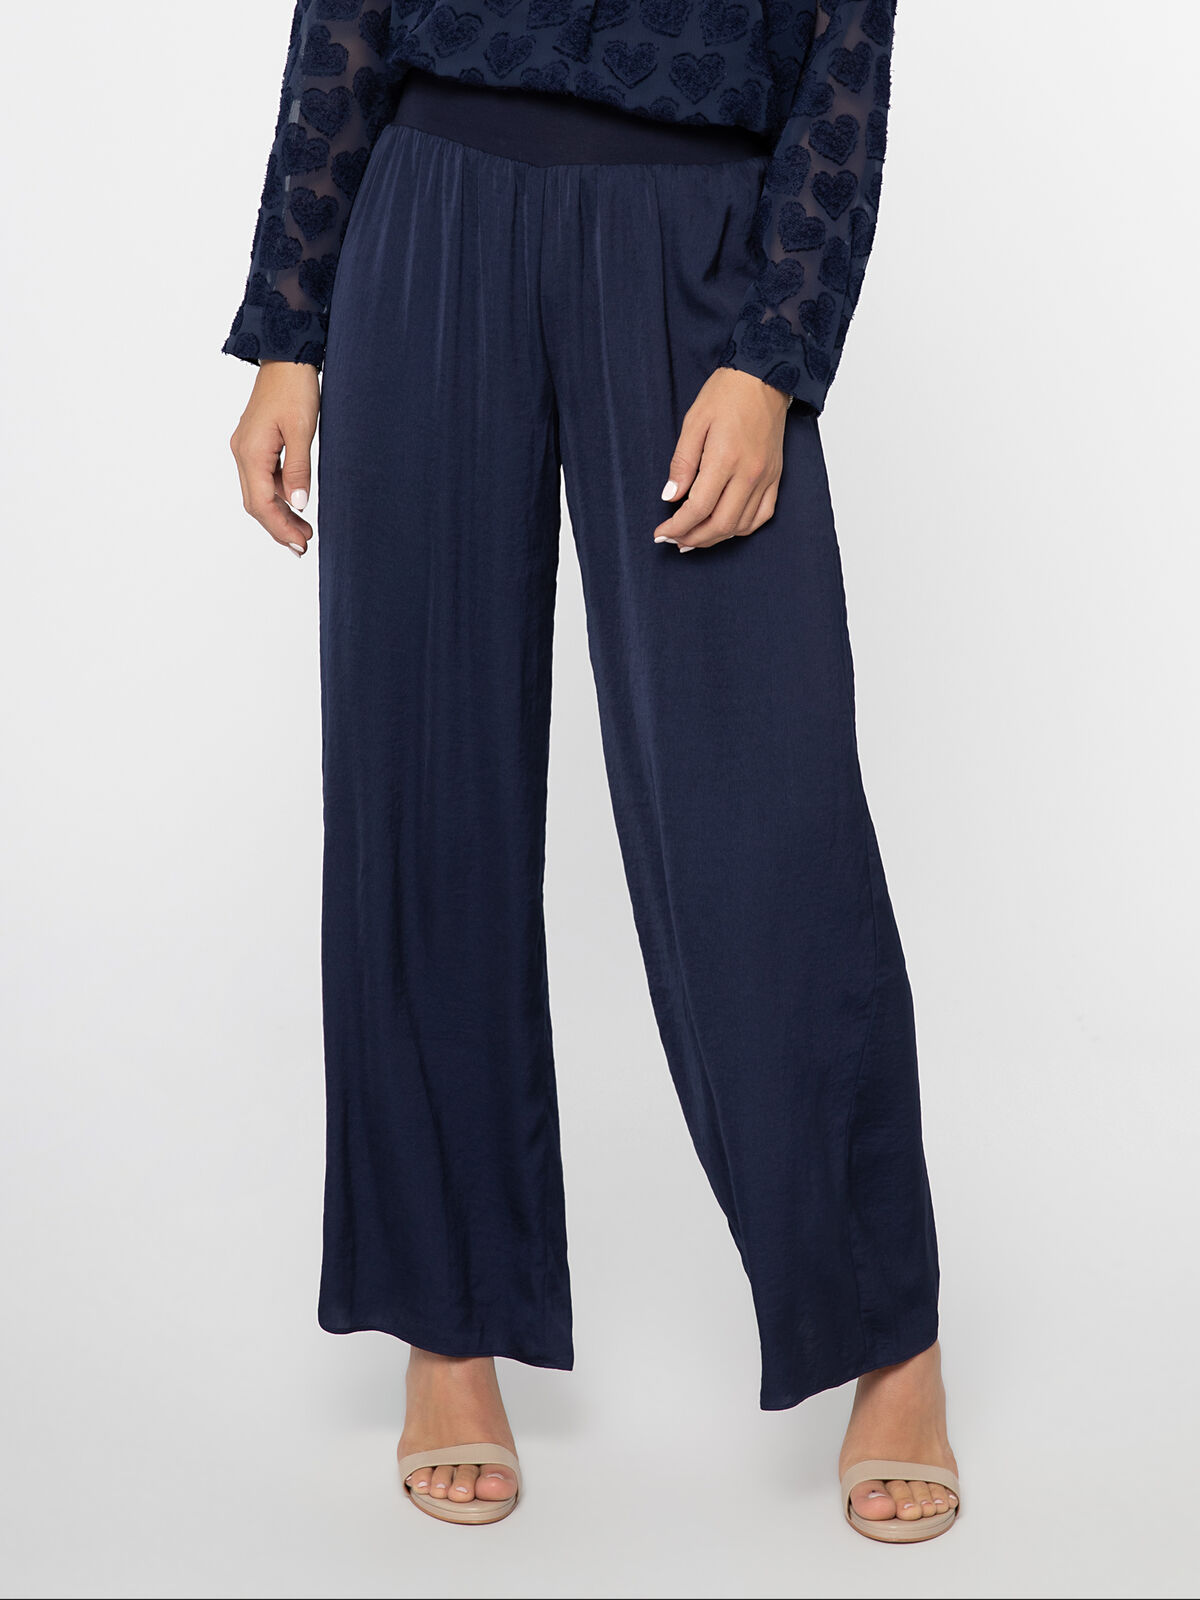 GO WITH THE FLOW PANT